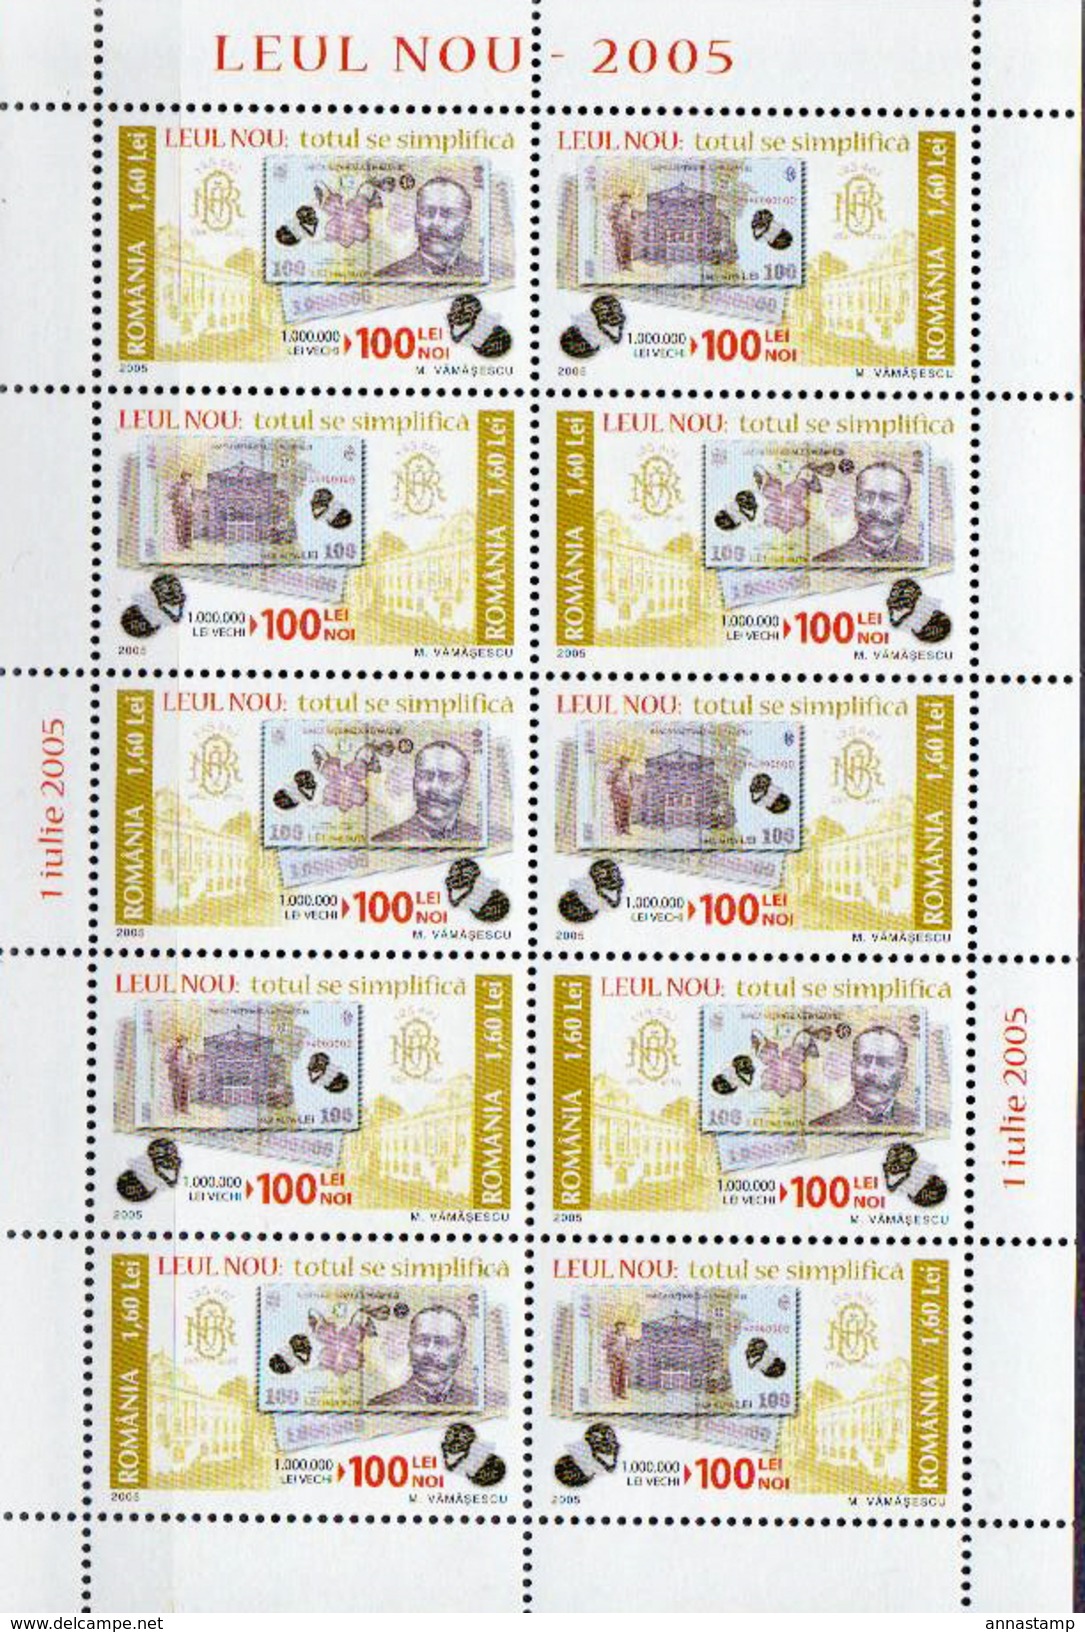 Romania MNH the new Lei banknotes and coins set in 10 sheetlets